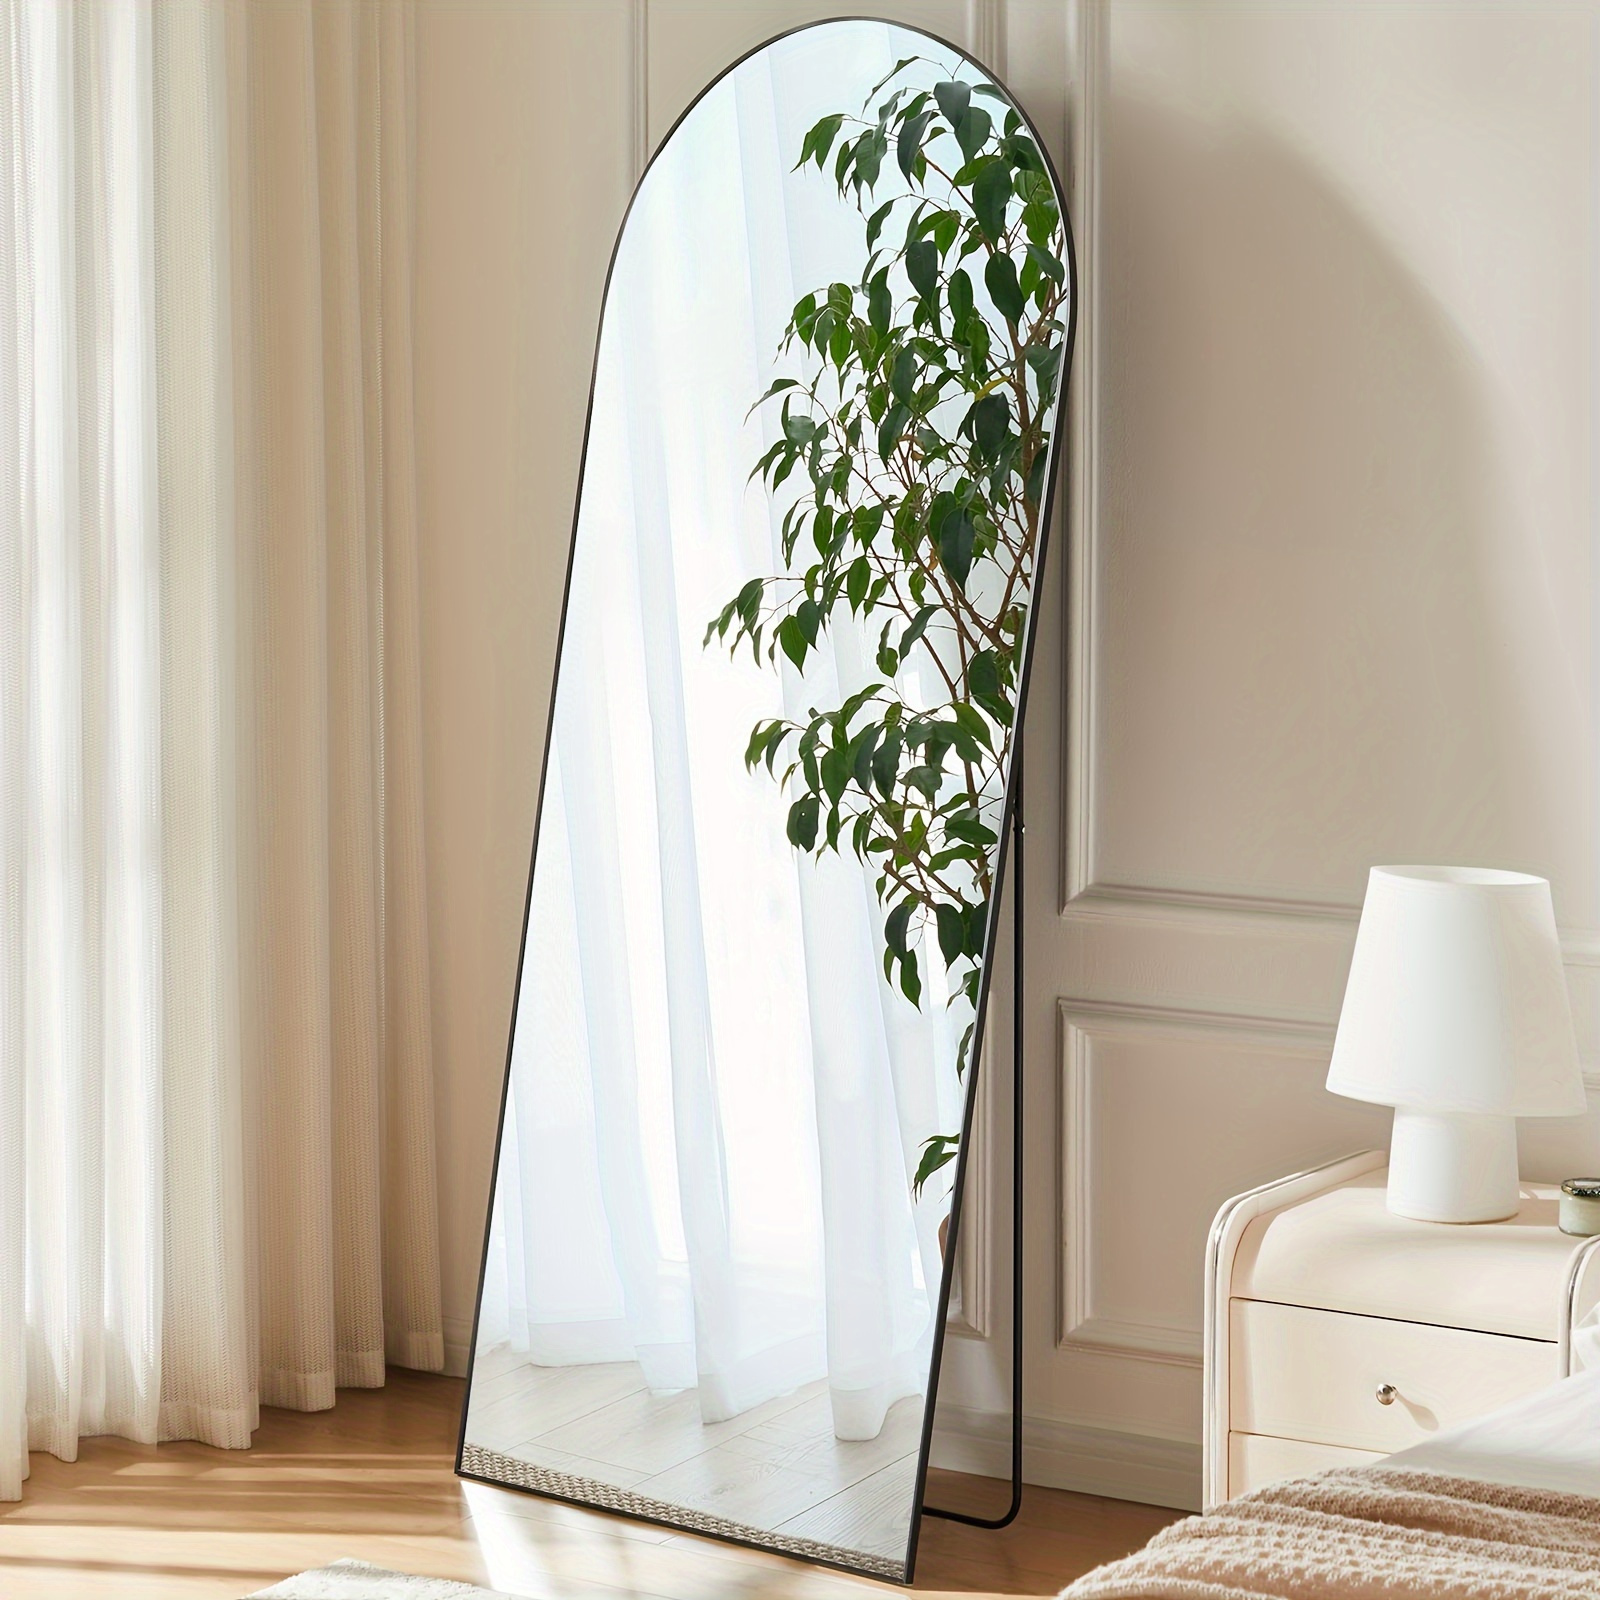 

Dumos Arched Full Length Mirror With Stand, 64"x21" Floor Mirror With Aluminum Alloy Frame For Bedroom, Standing Full Body Mirror With Shatter-proof Nano Glass For Wall, Living Room, Cloakroom